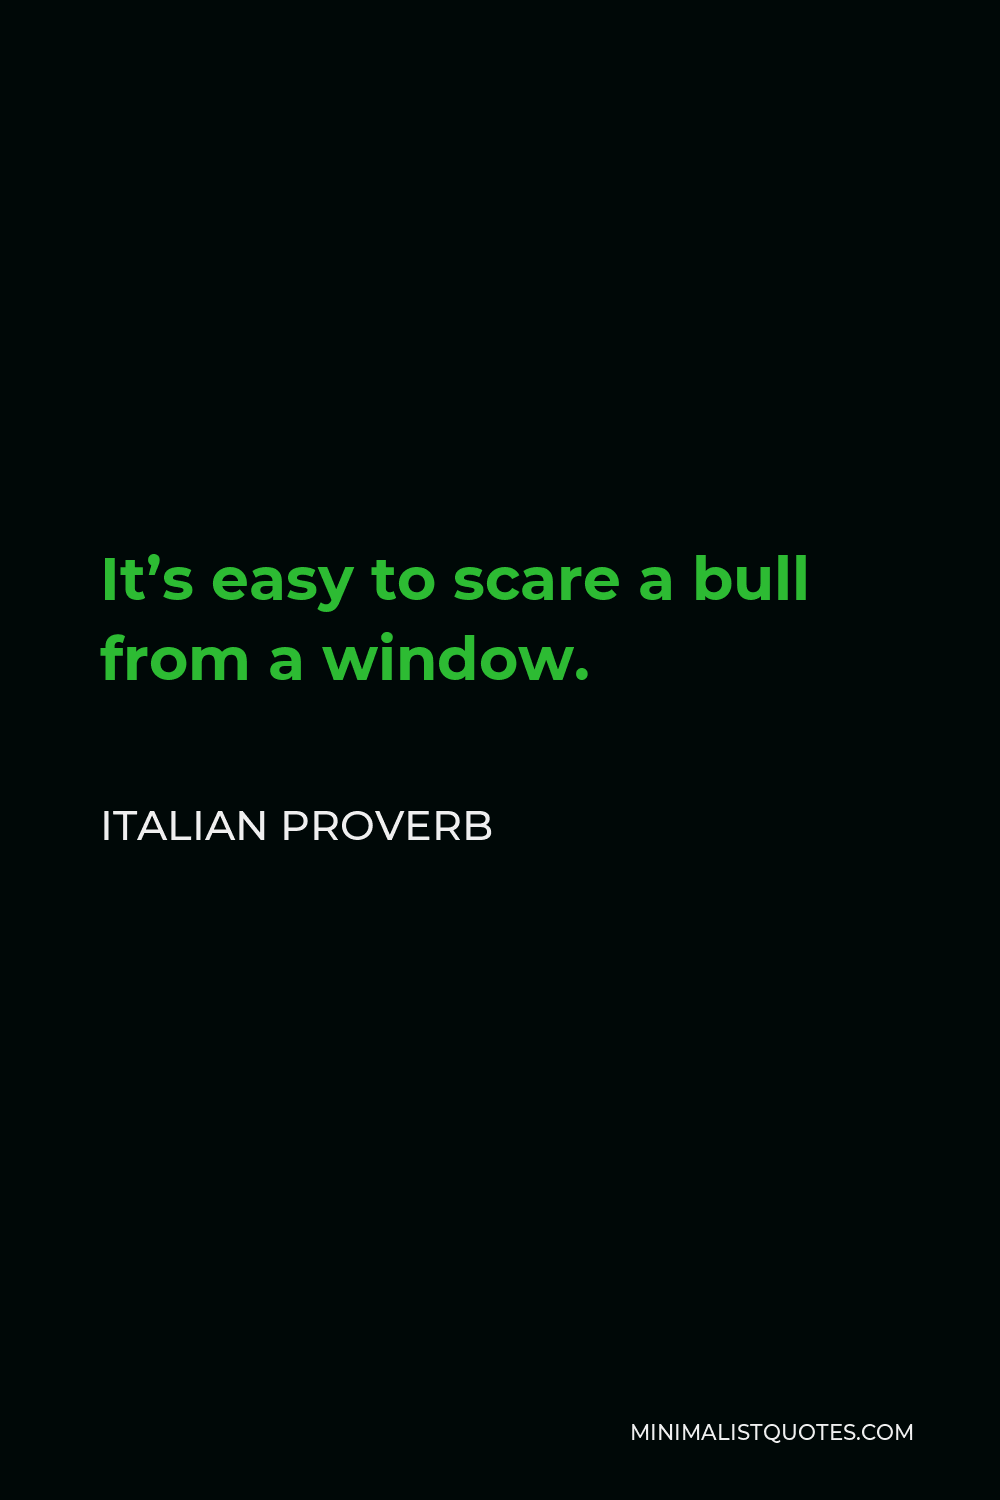 Italian Proverb Quote - It’s easy to scare a bull from a window.